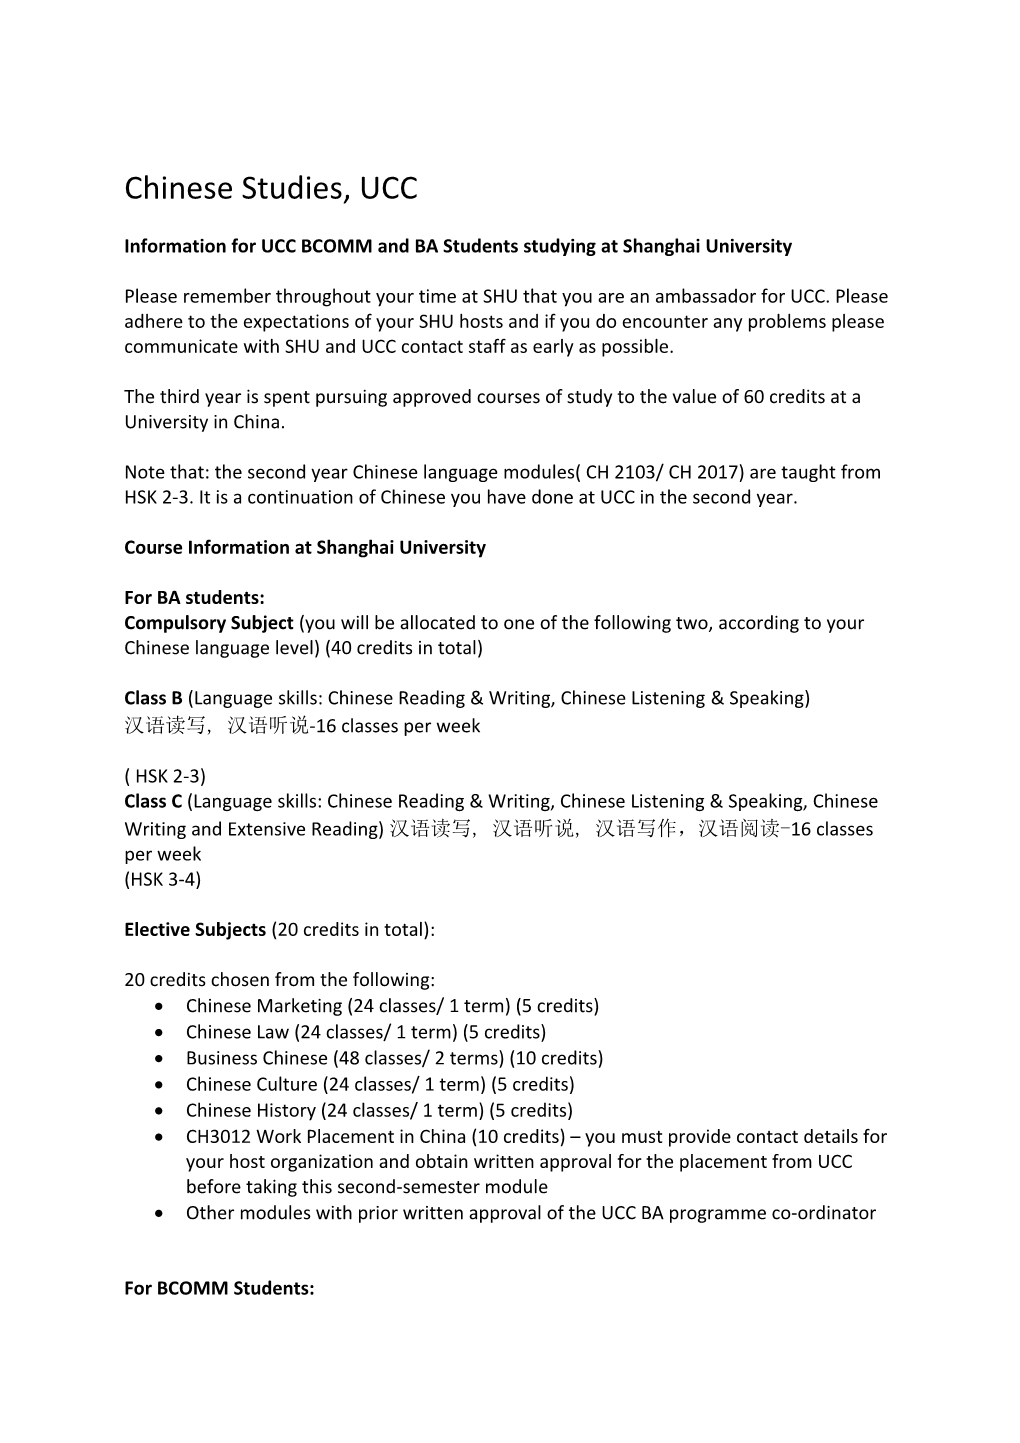 Information for UCC BCOMM and BA Students Studying at Shanghai University